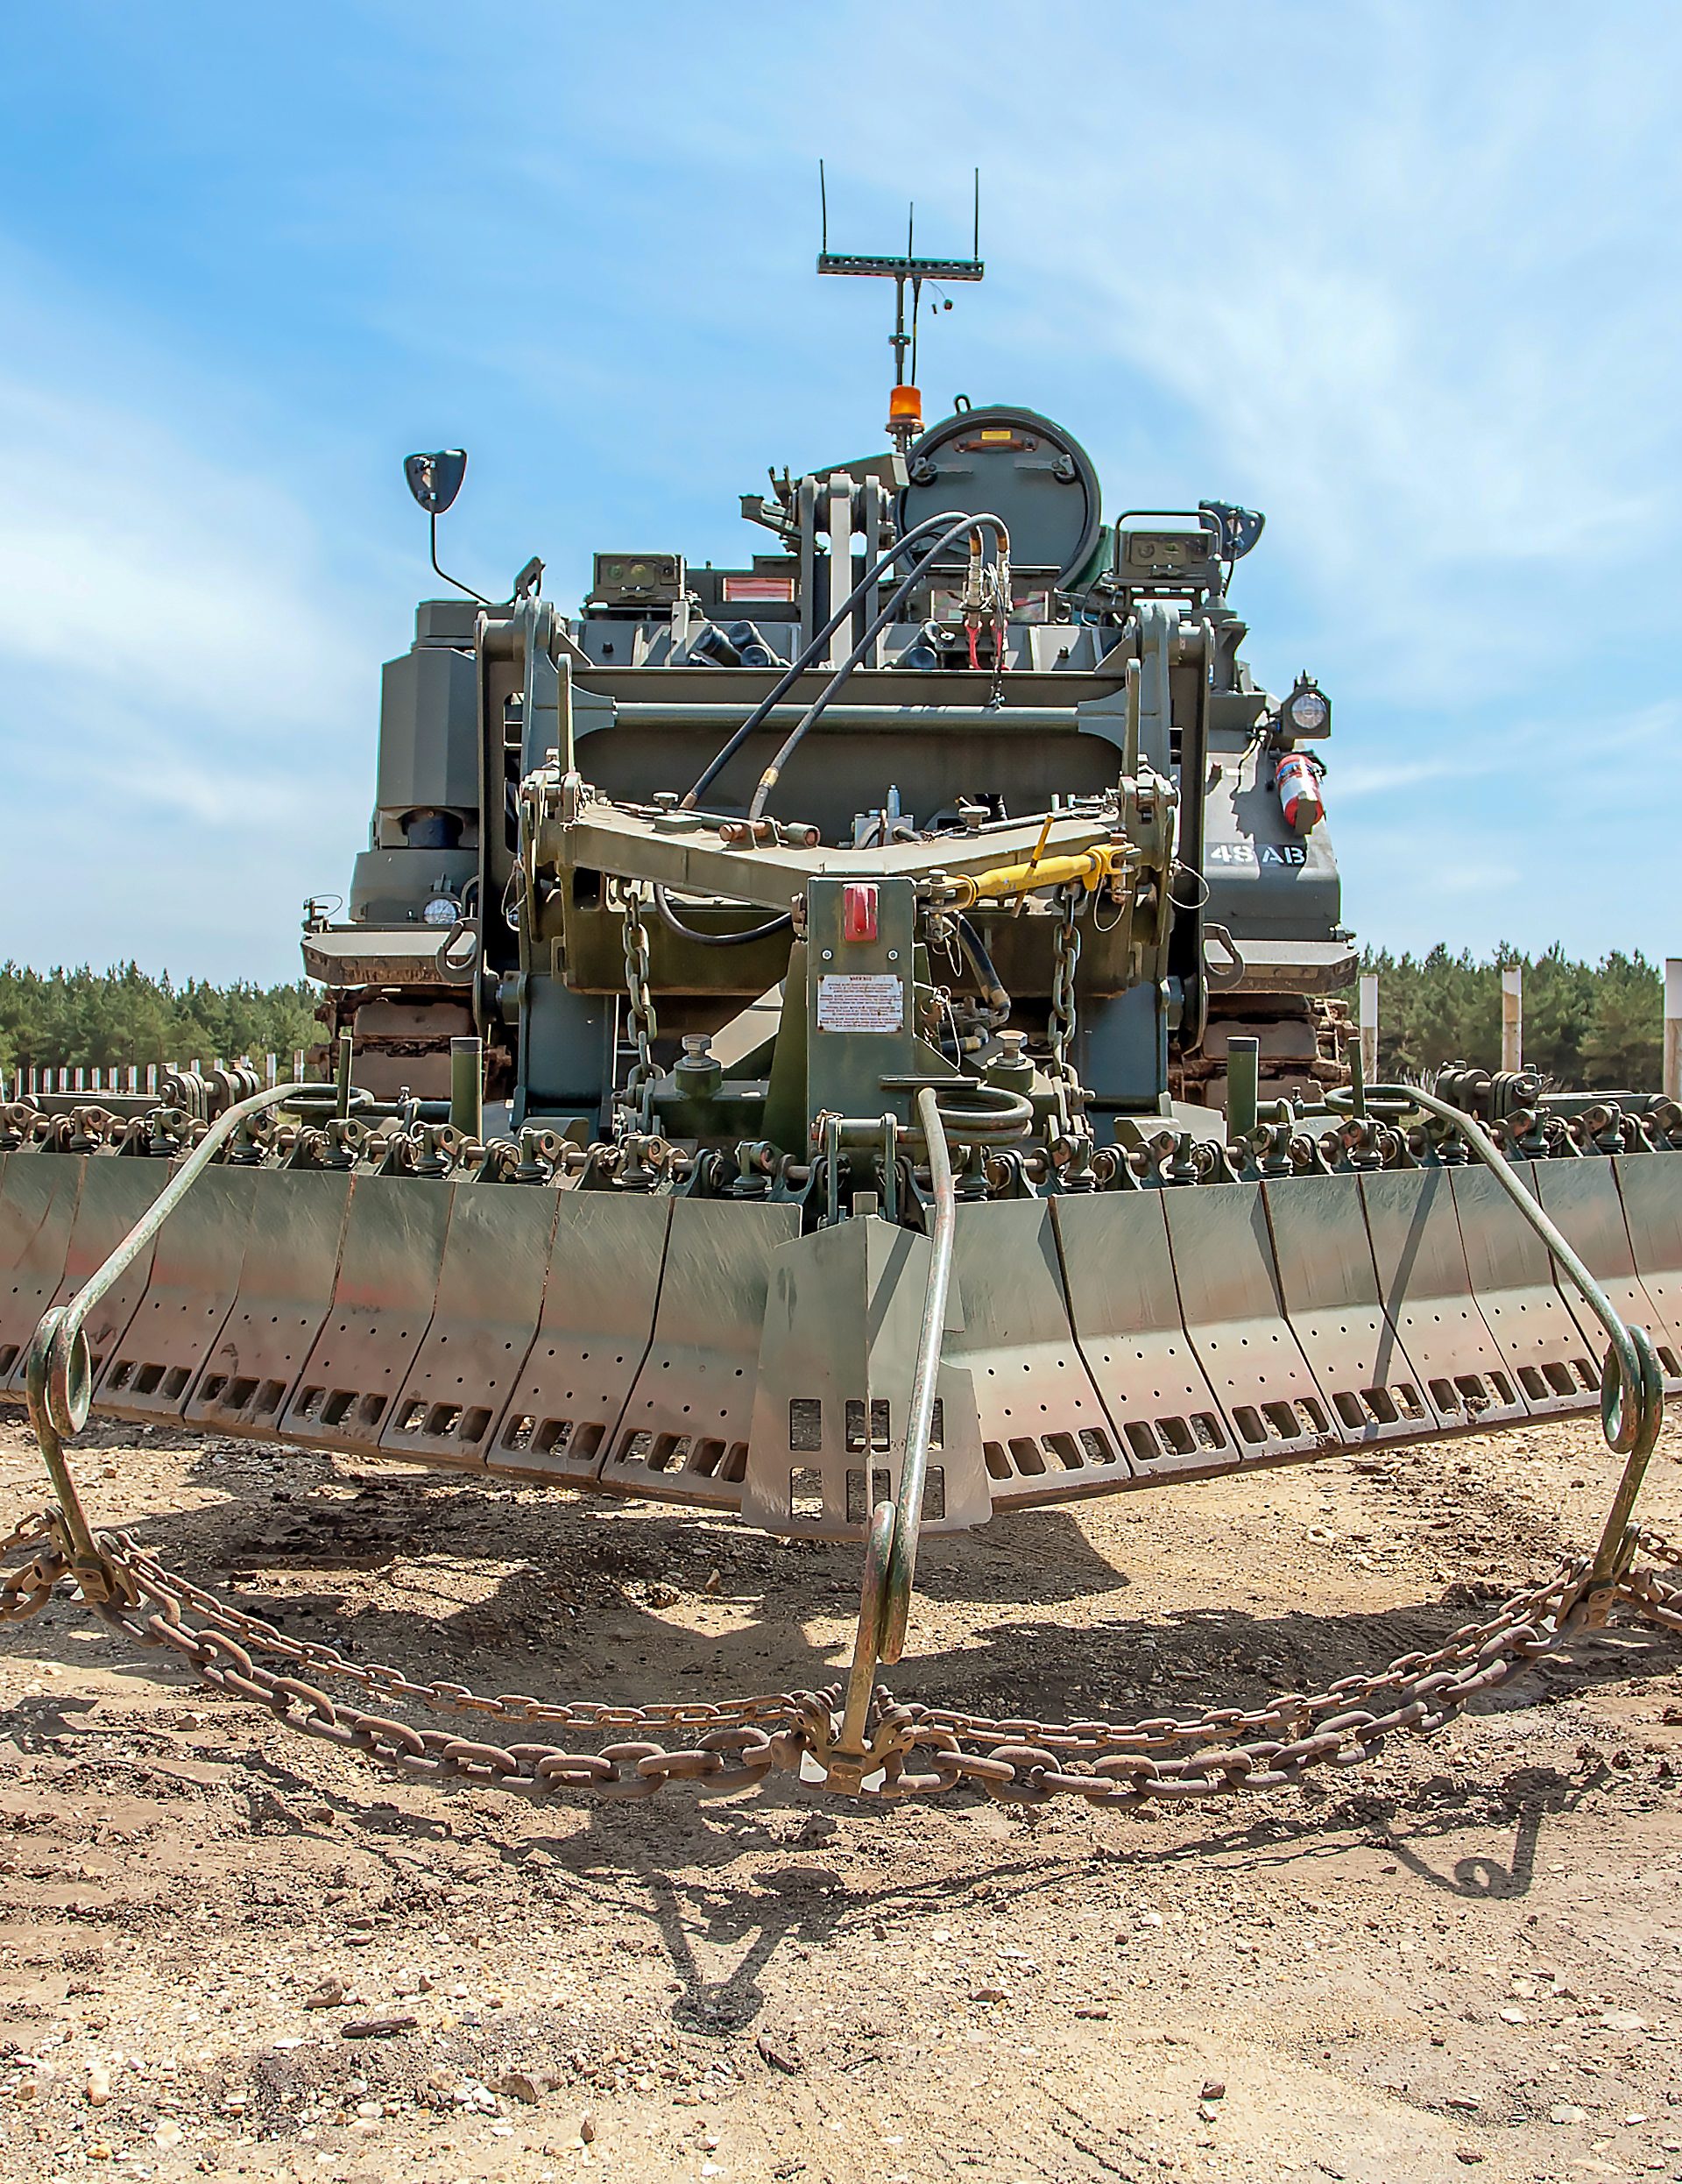 Pearson Engineering’s Surface Clearance Device provides combat engineer vehicles with a surface laid landmine clearance capability.